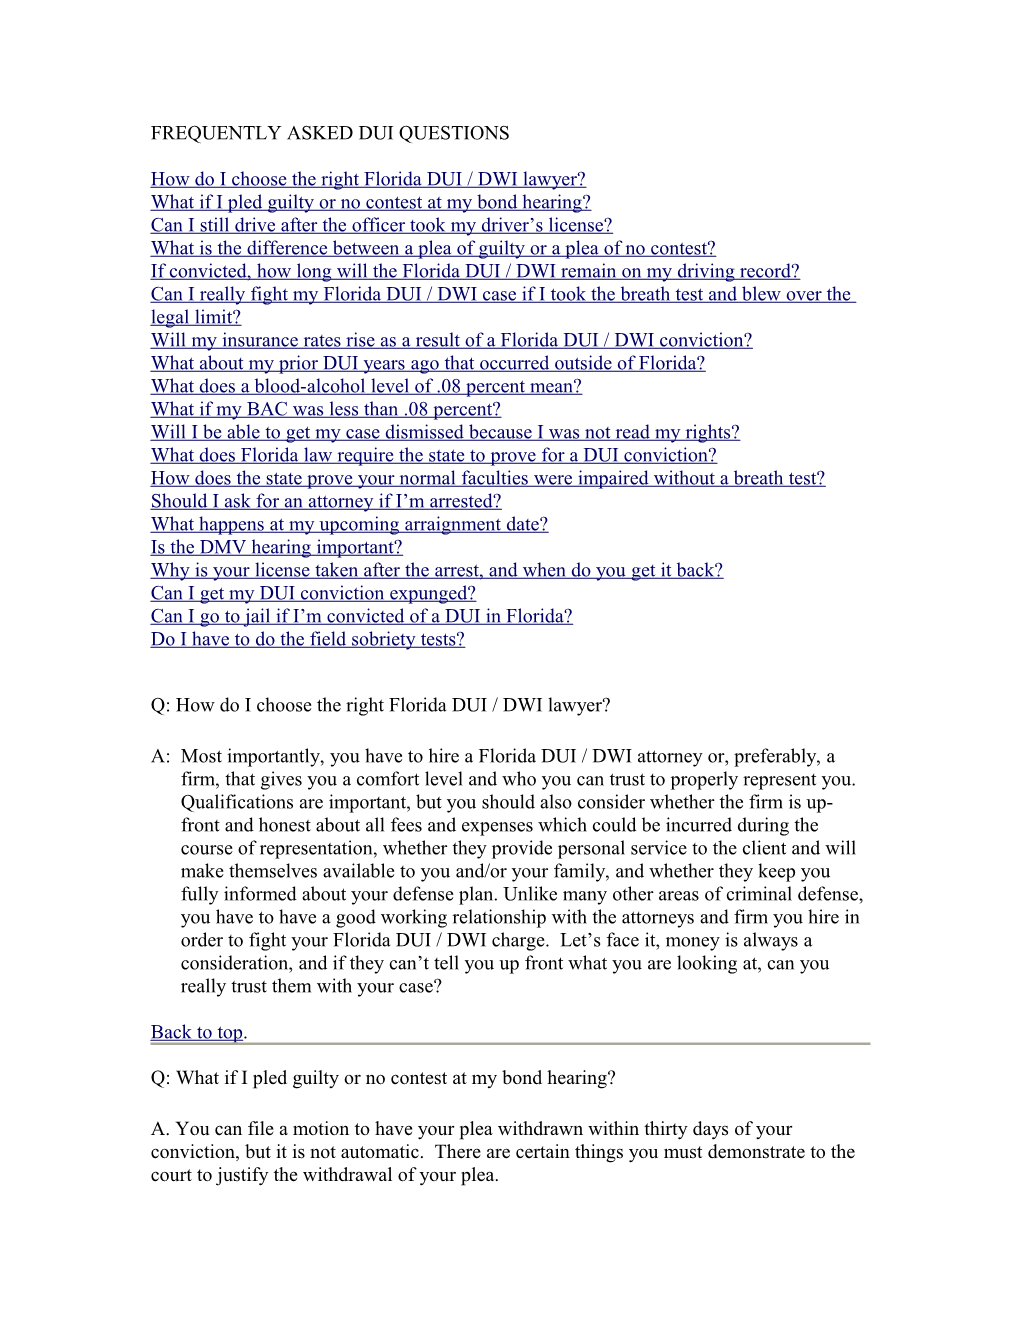 FREQUENTLY ASKED QUESTIONS Page